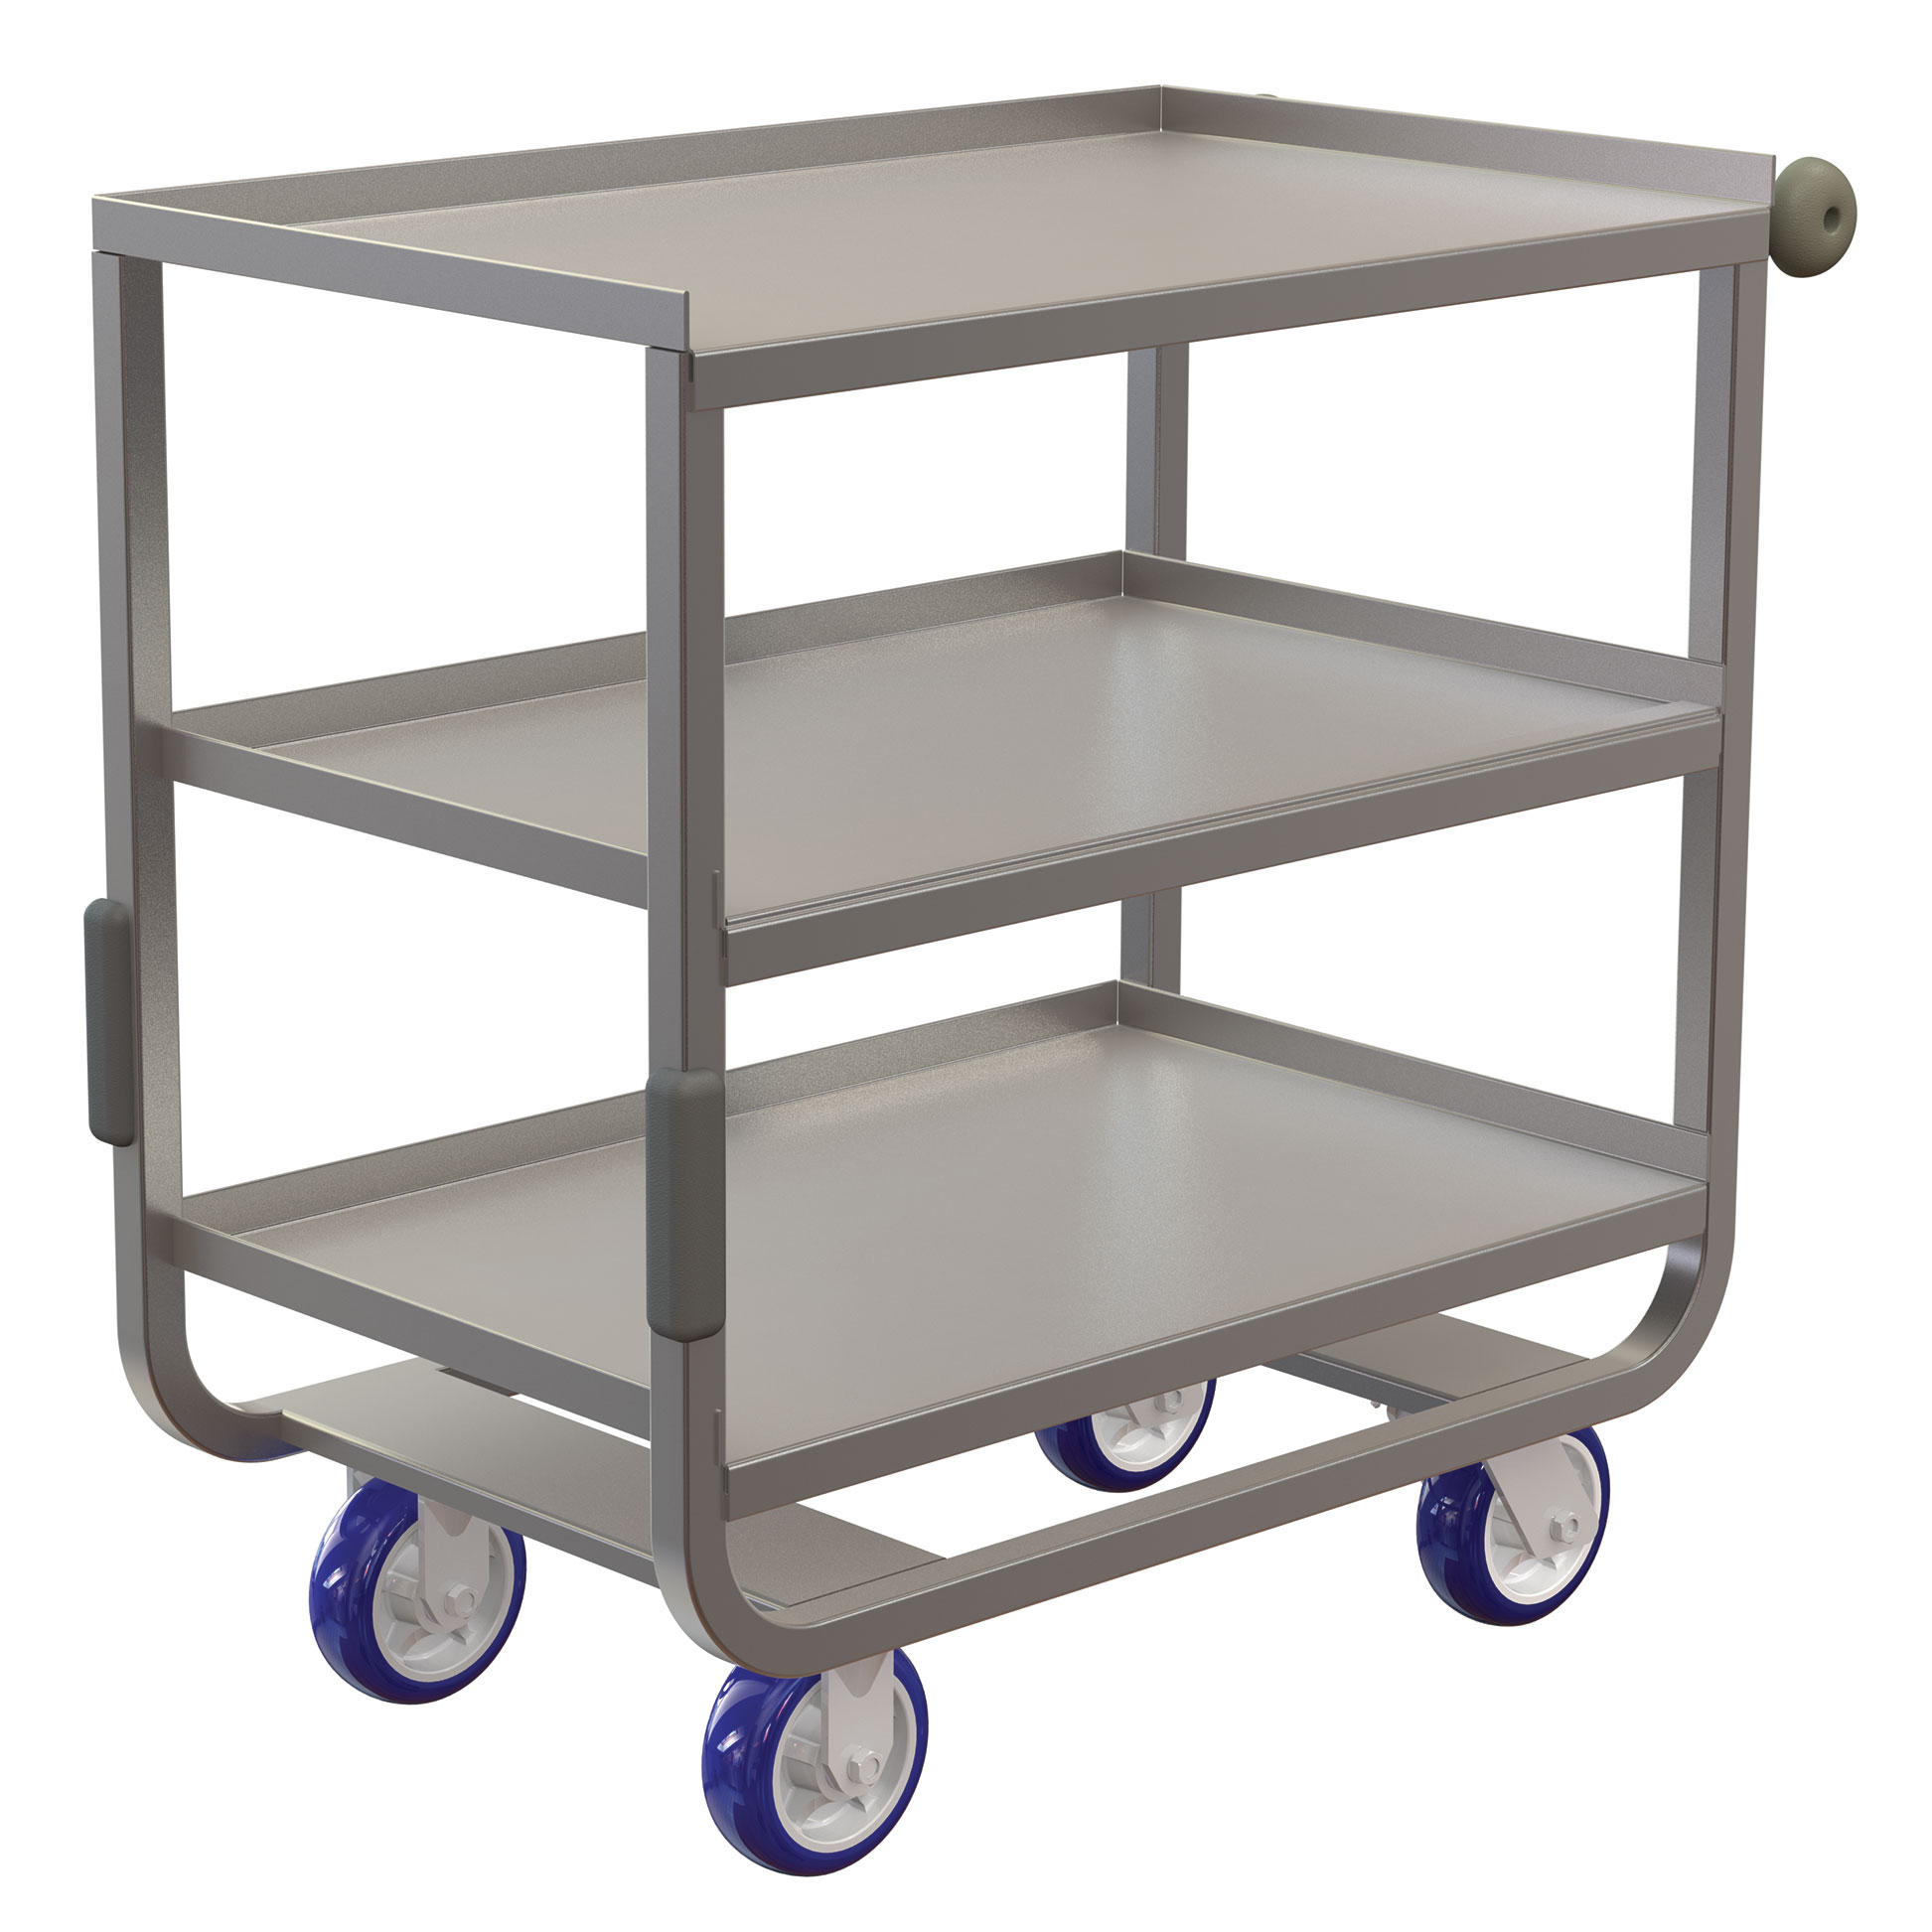 UC7022133 - Stainless Steel 2 Shelf Utility Cart 21 x 33 - Stainless  Steel